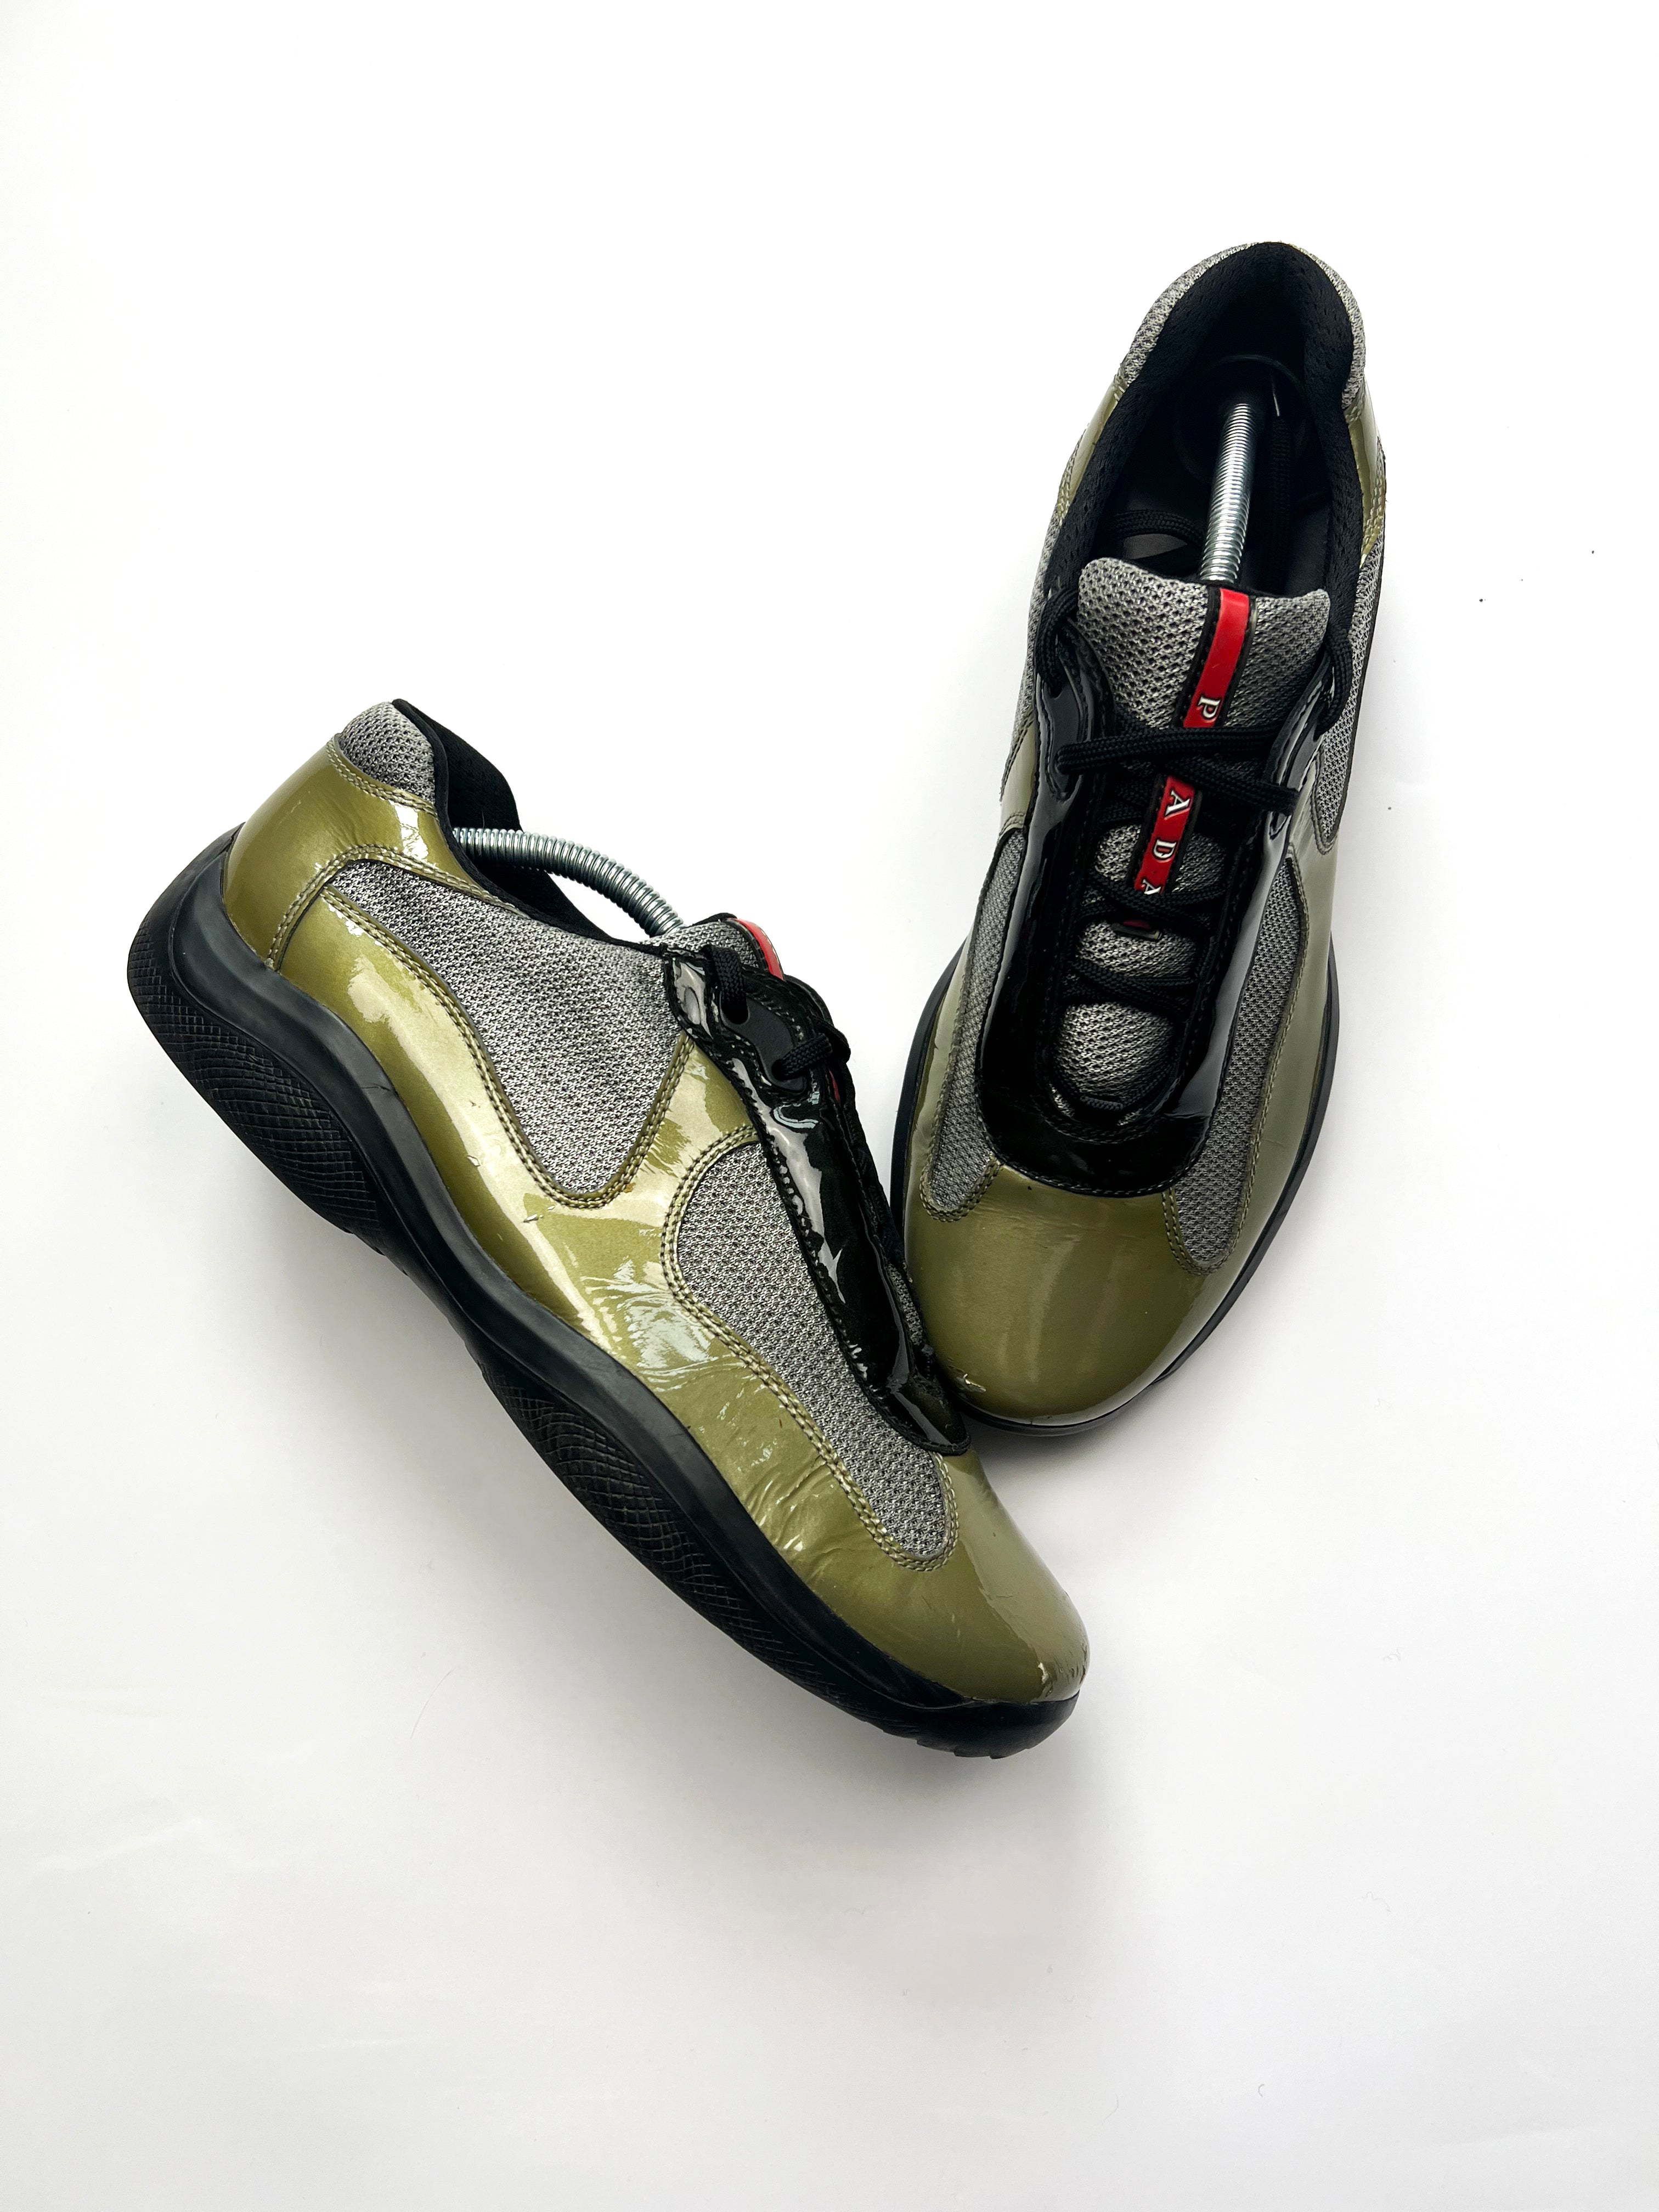 Prada Americas Cup Olive Trainers 00's